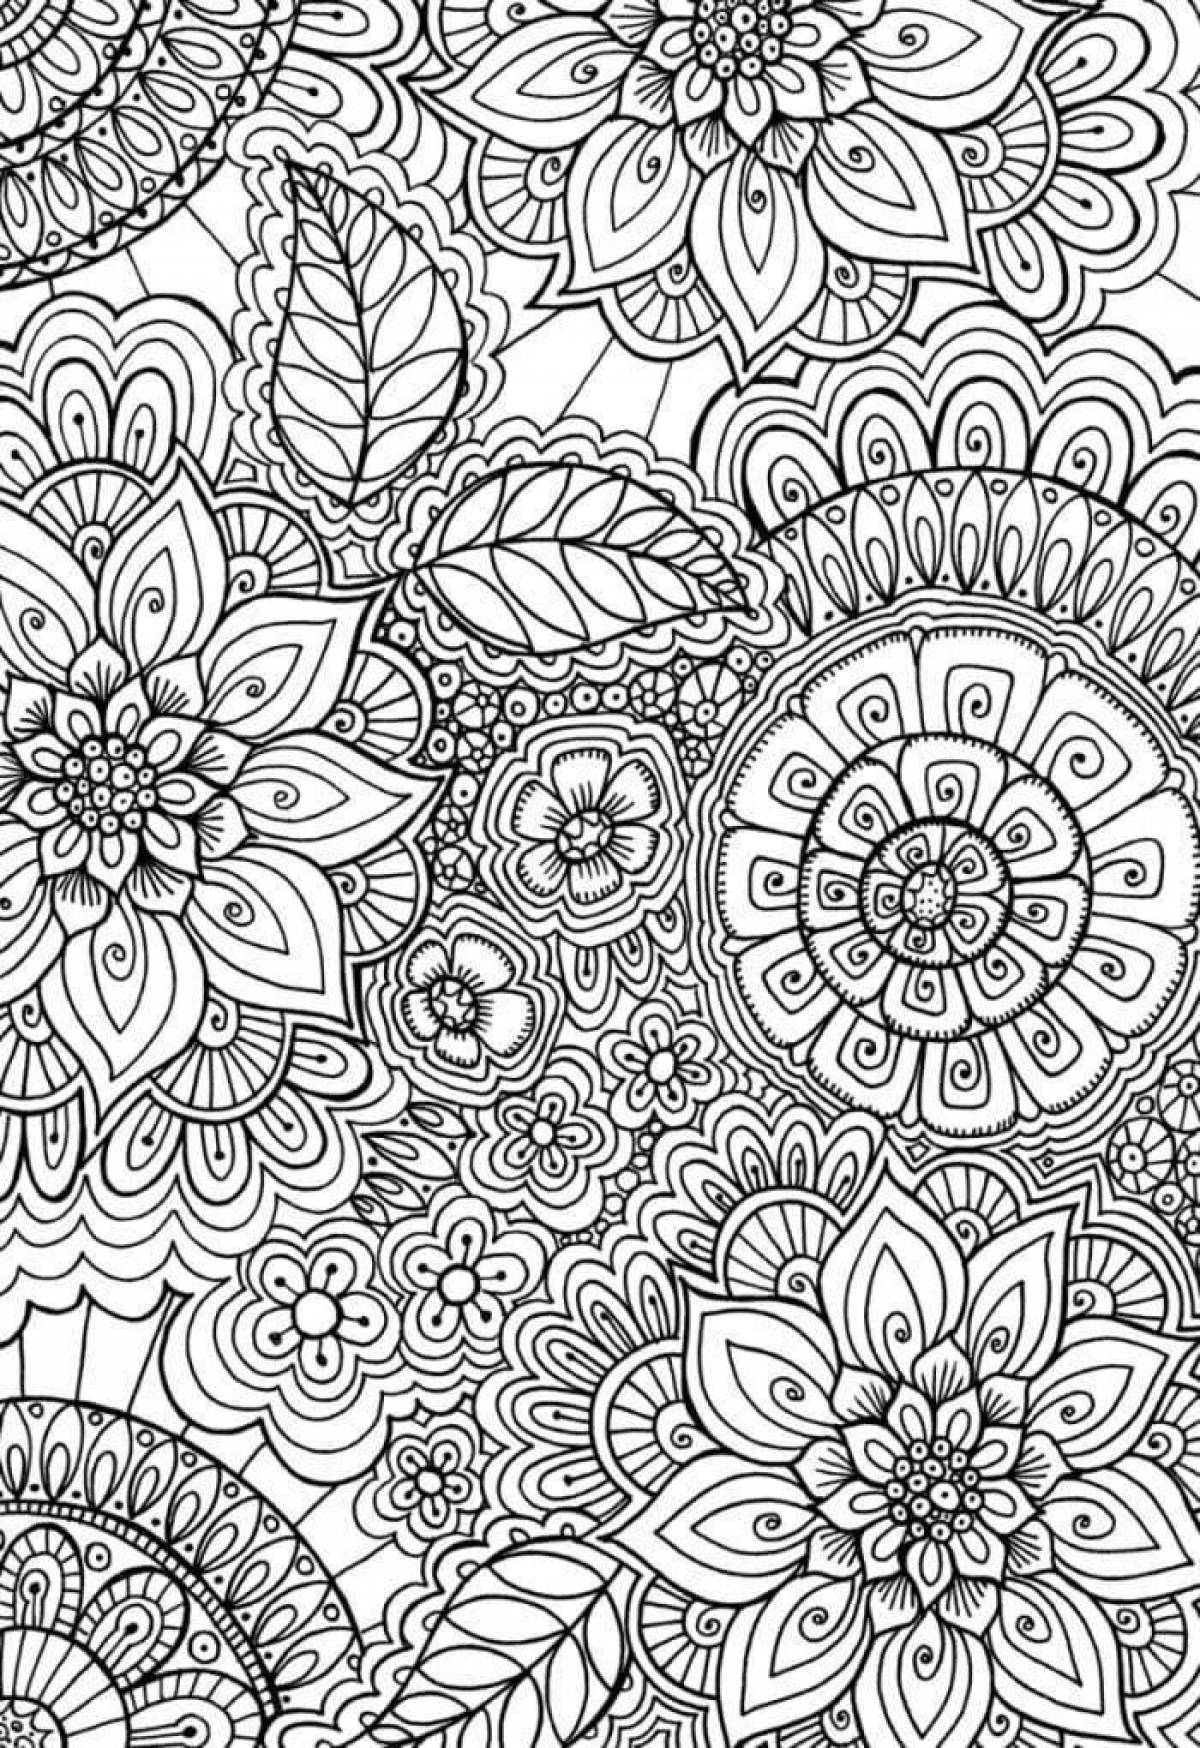 Easy anti-stress coloring